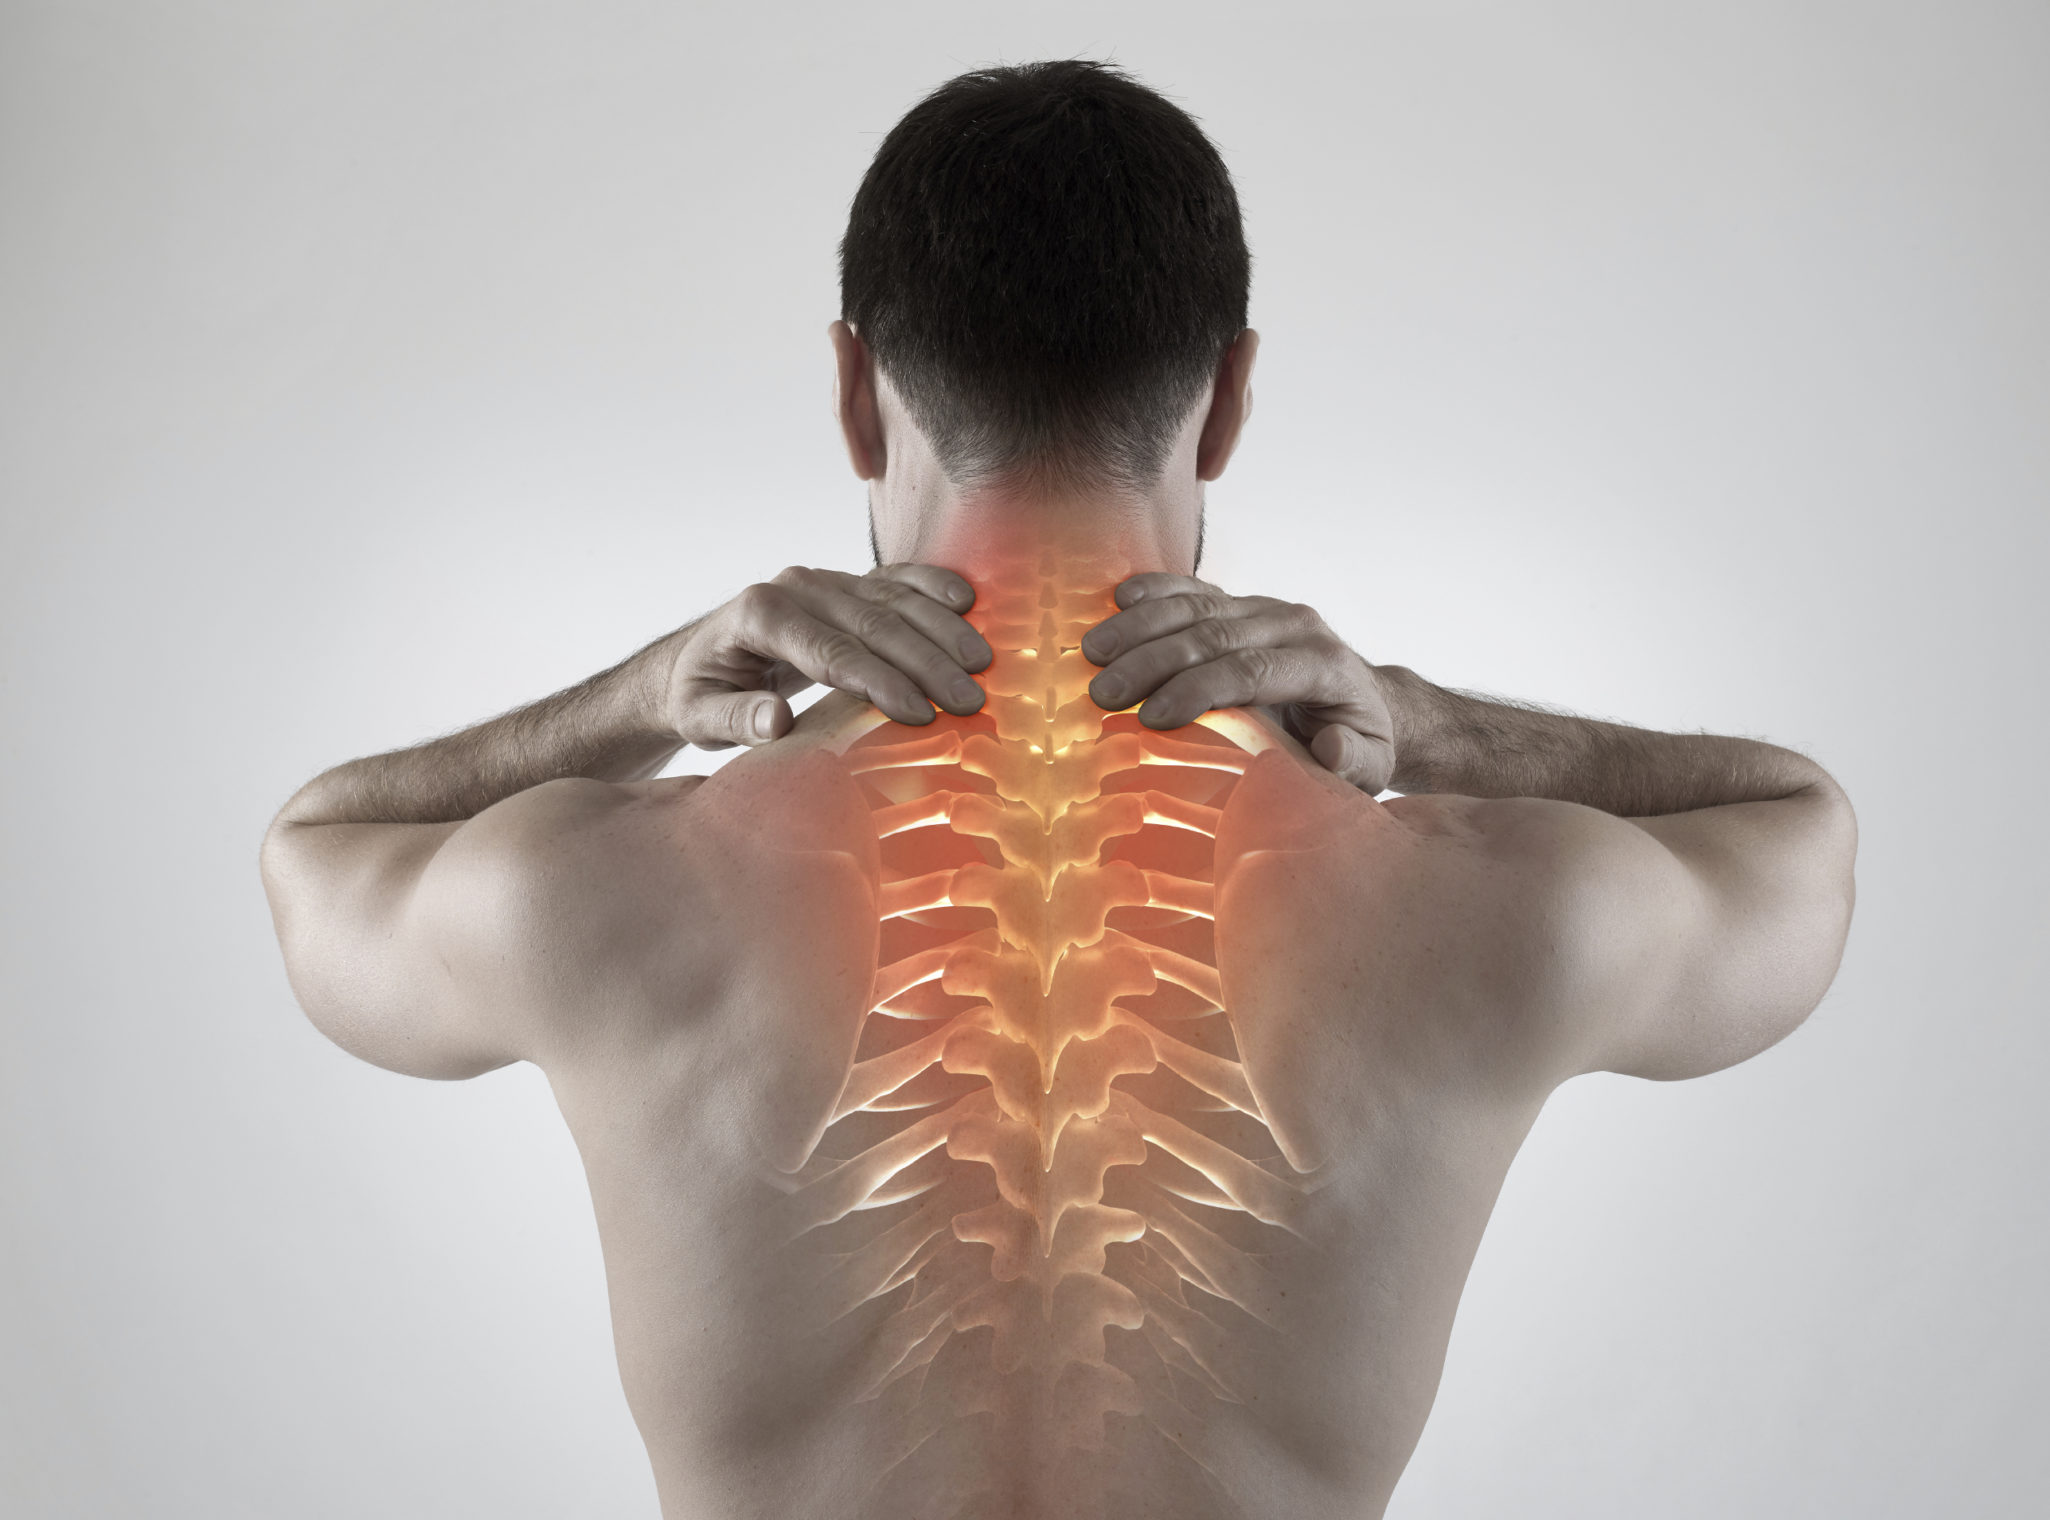 man clenching back with cross section of spine glowing red to represent pain from cervical fracture